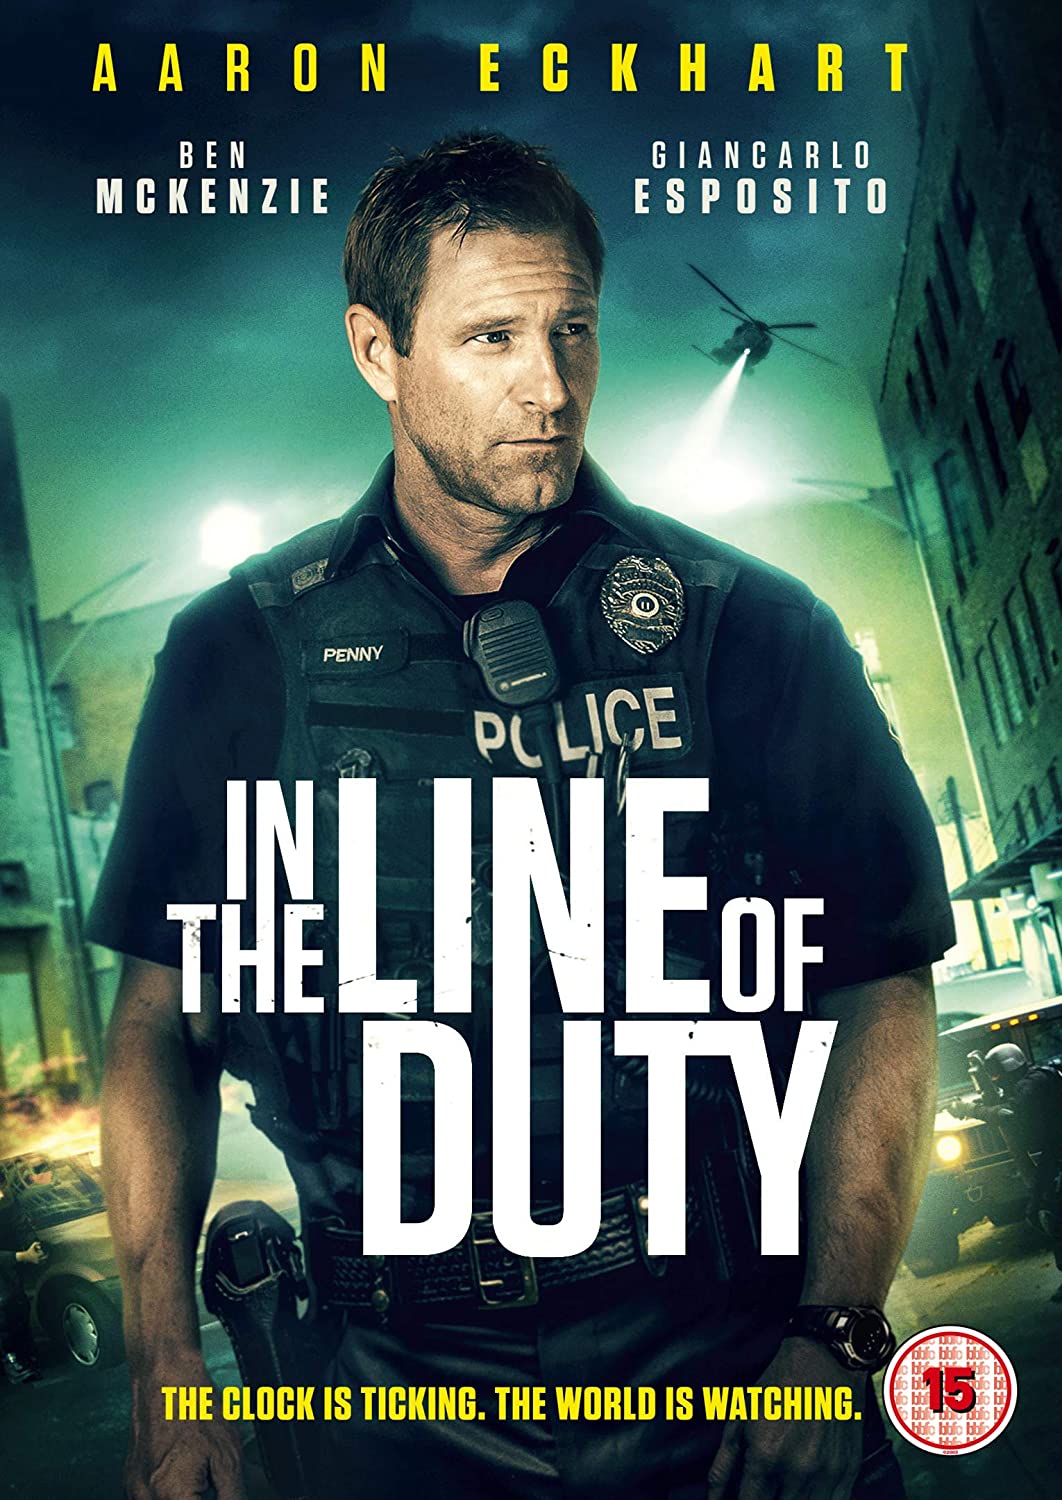 In the Line of Duty - Action [DVD]